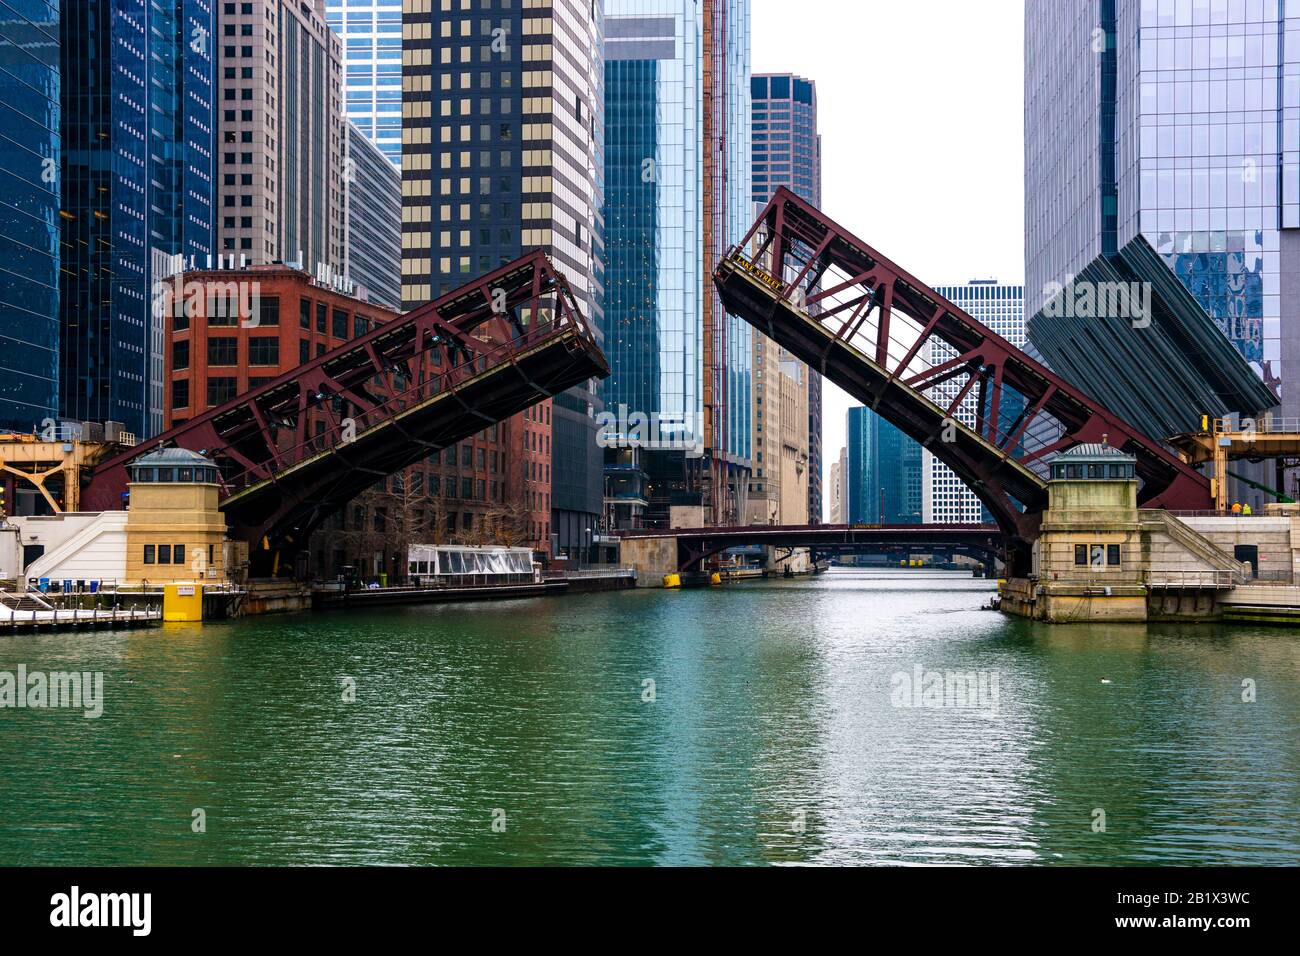 Lake Street bridge lifted up for repairs in The Loop in Chicago, Illinois. Stock Photo